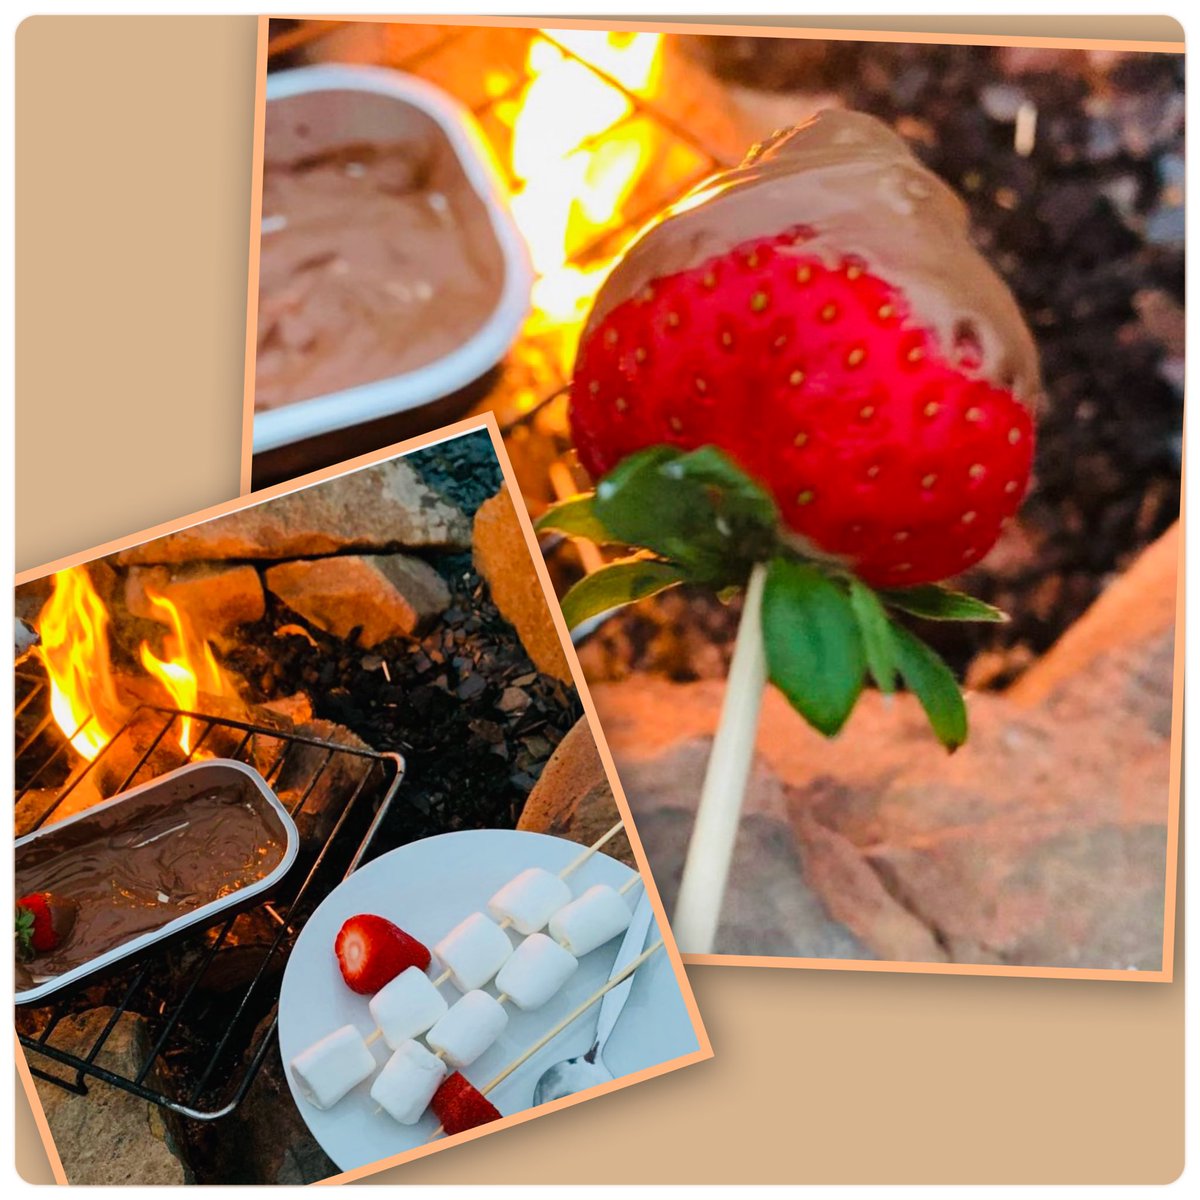 #marshmallow #strawberry #firepit #campfire #glamping #Pembrokeshire #visitpembrokeshire #visitwales #lastminuteholiday #fishguard #northpembs #camping #coolcamping 
tregroes.co.uk #tregroesholiday #makingdreams #makingmemories